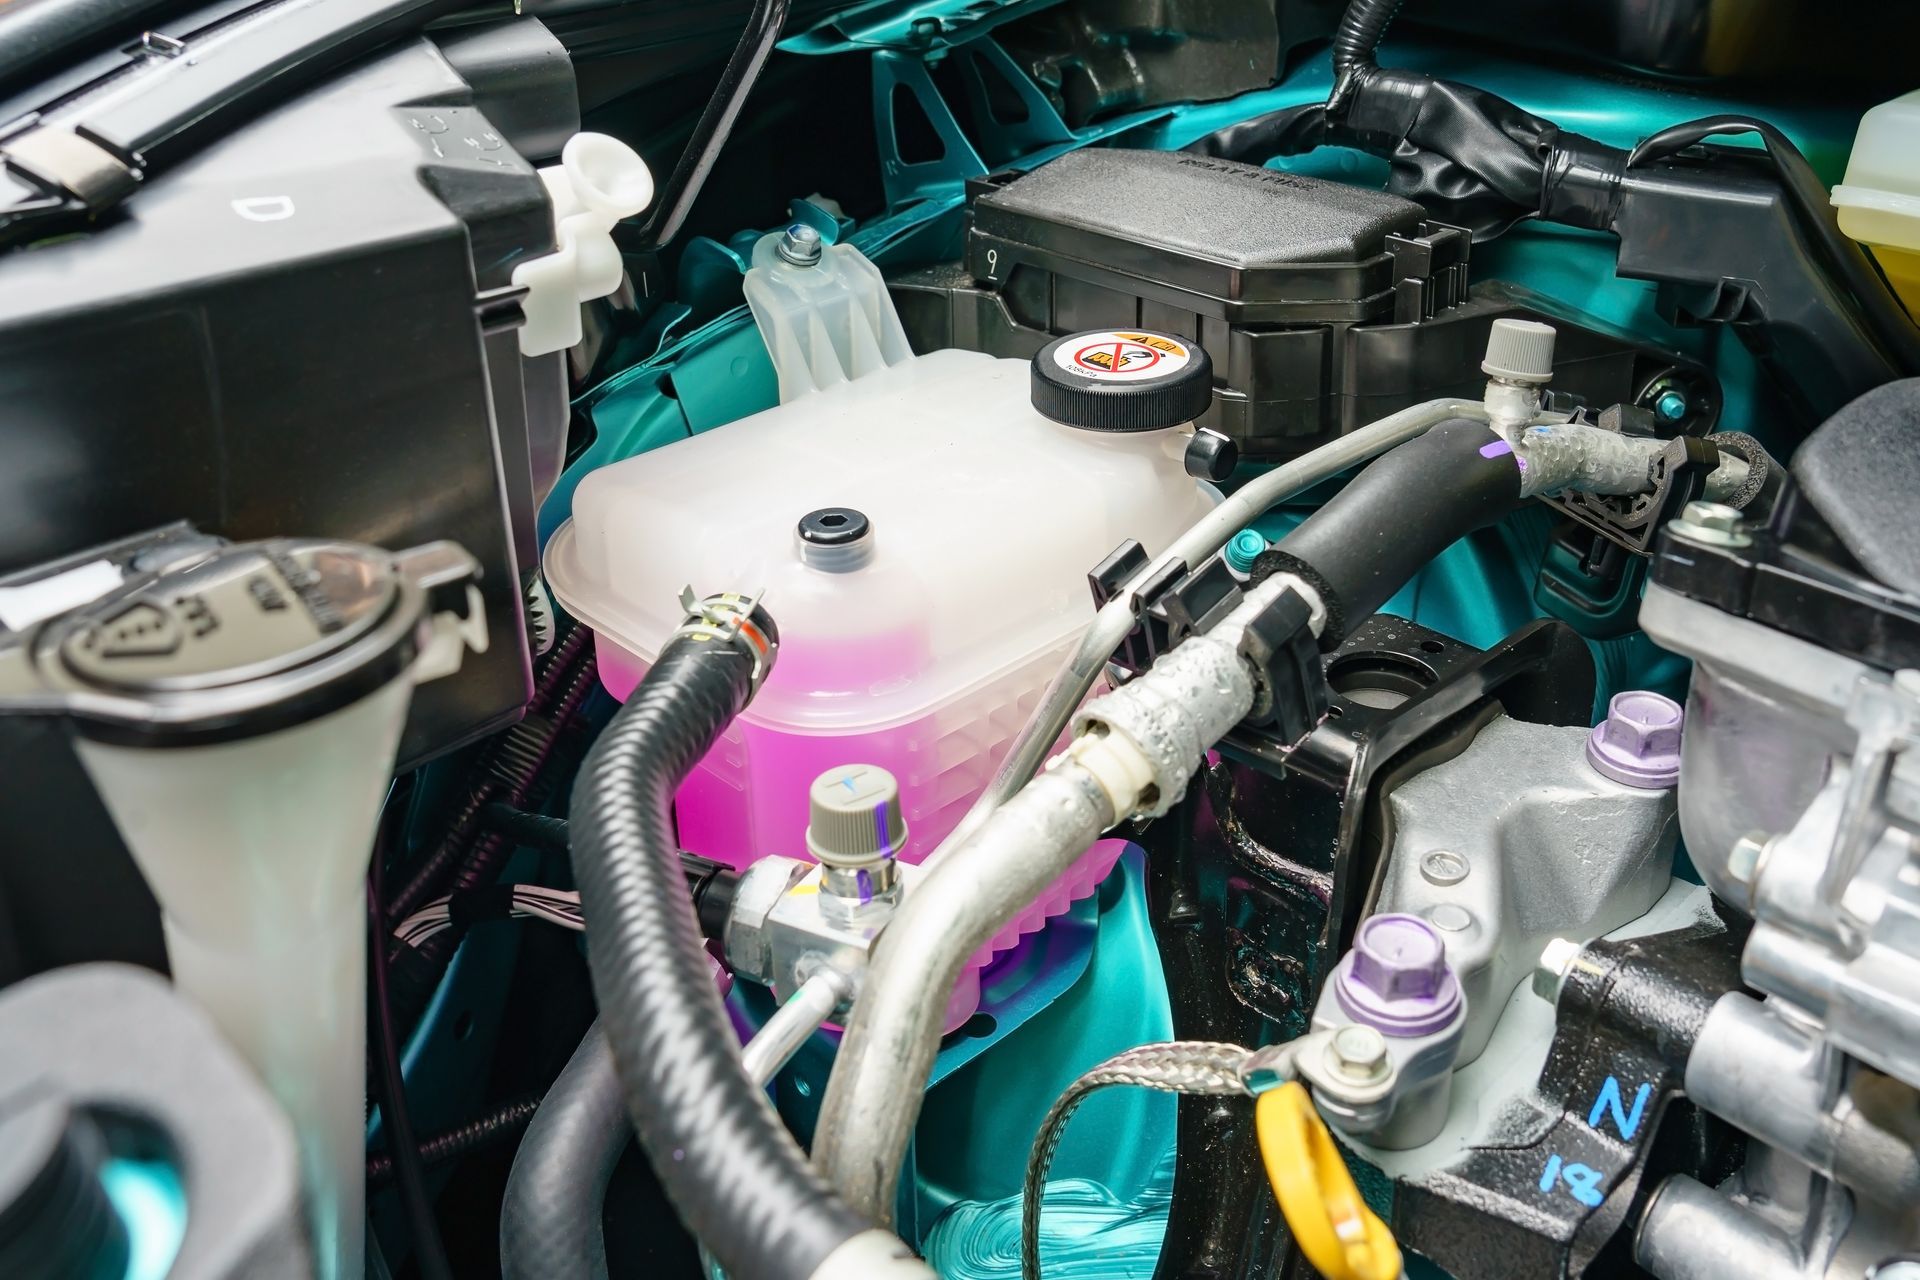 Cooling System Service at ﻿808 Automotive Inc.﻿ in ﻿Hubbard, OR﻿